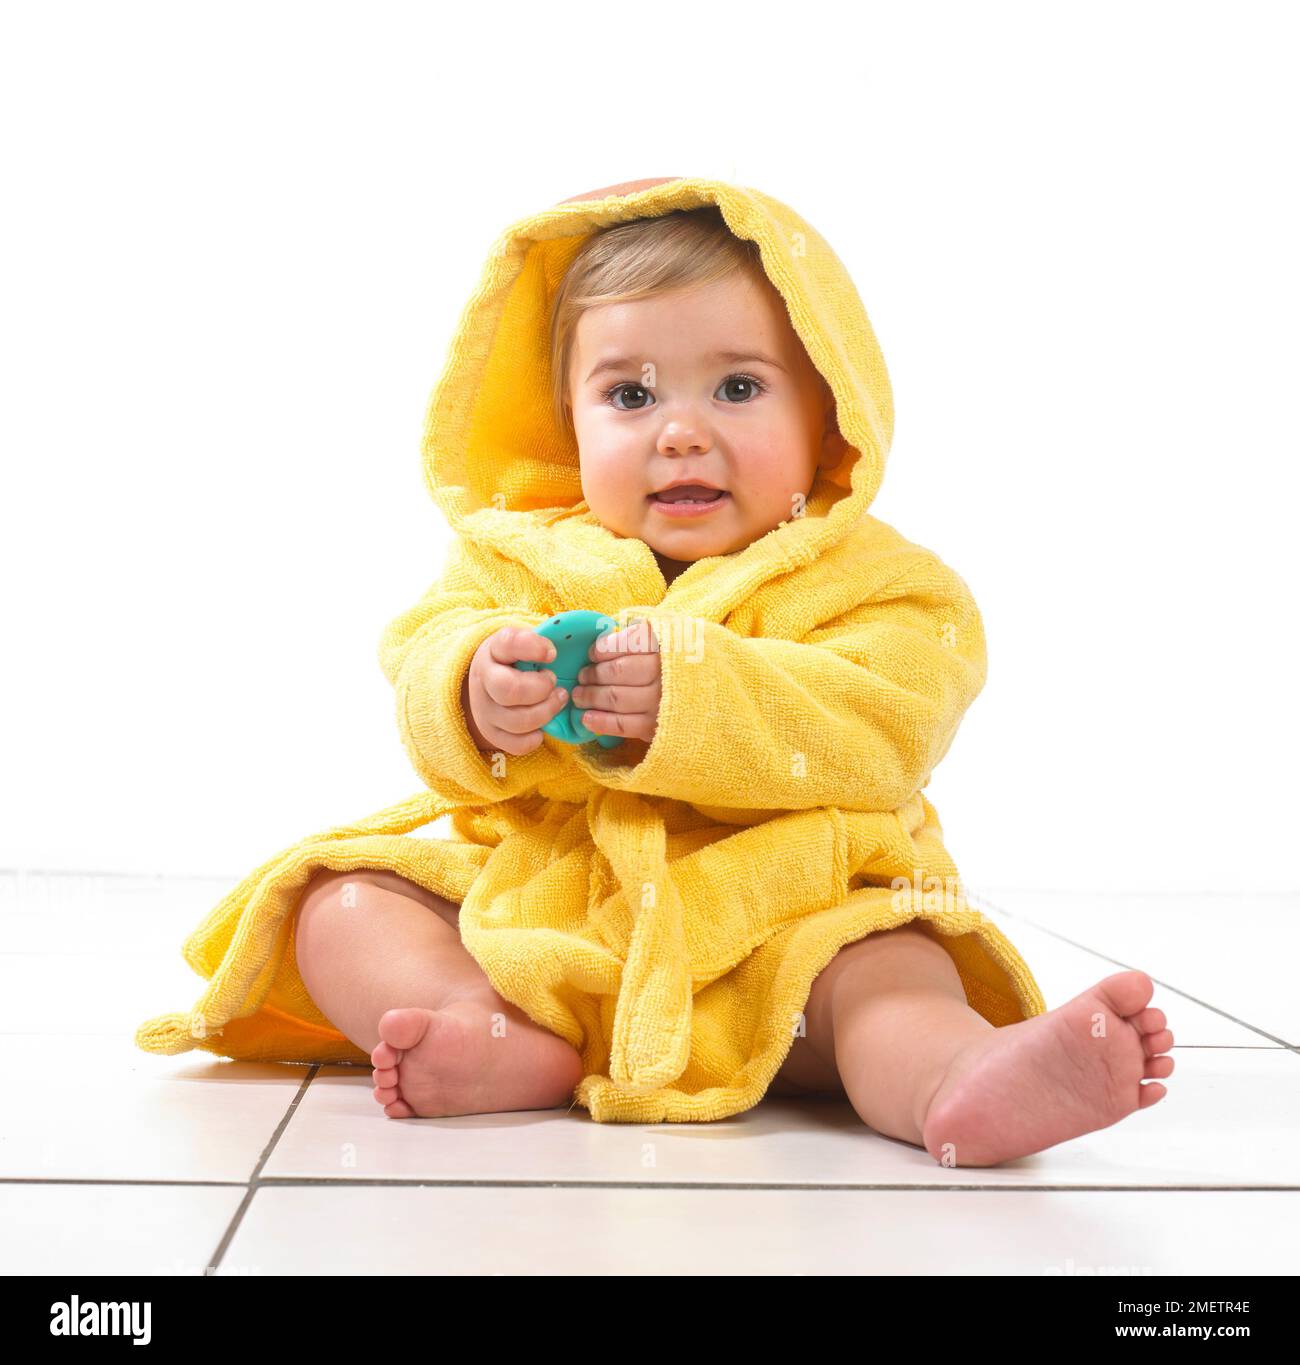 Baby girl sitting wearing yellow dressing gown, 12 months Stock Photo